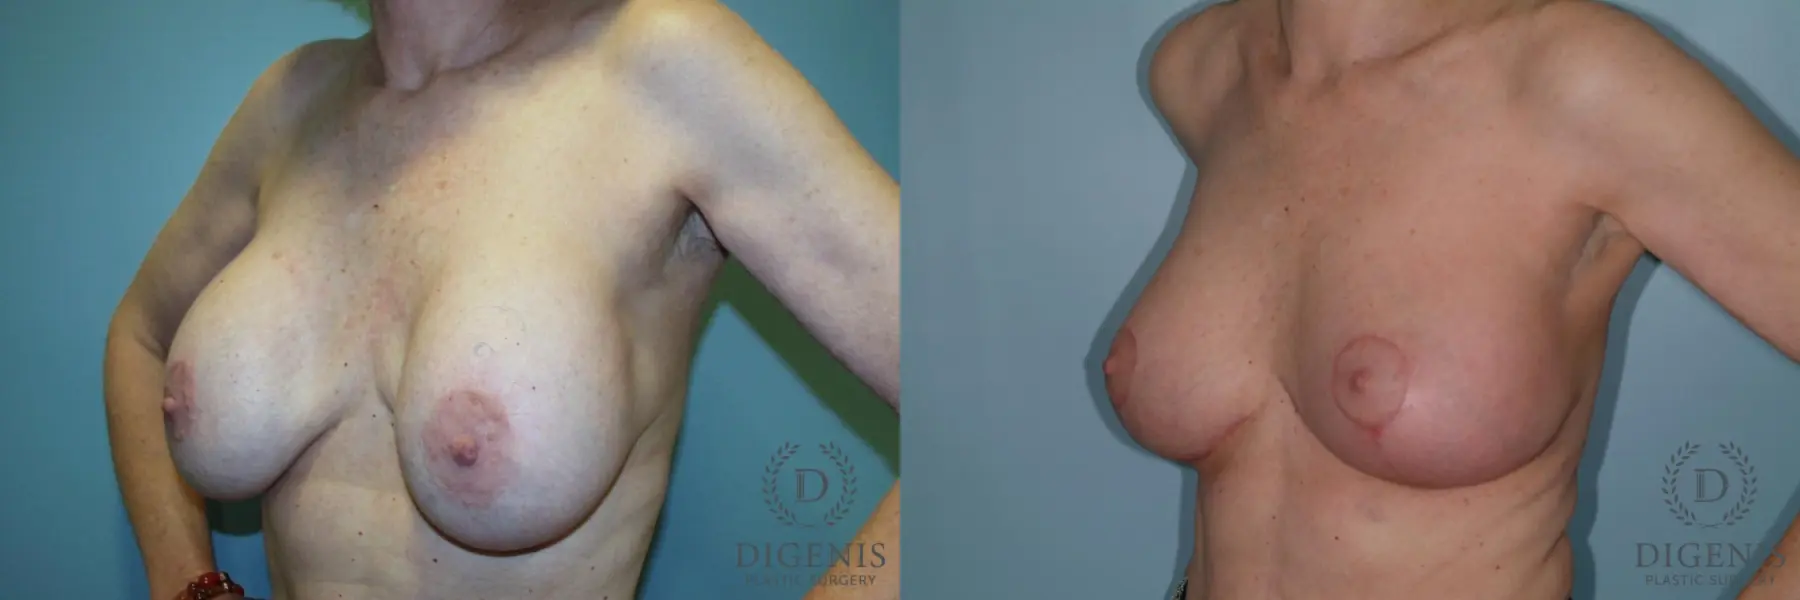 Breast Lift With Implants: Patient 6 - Before and After 4